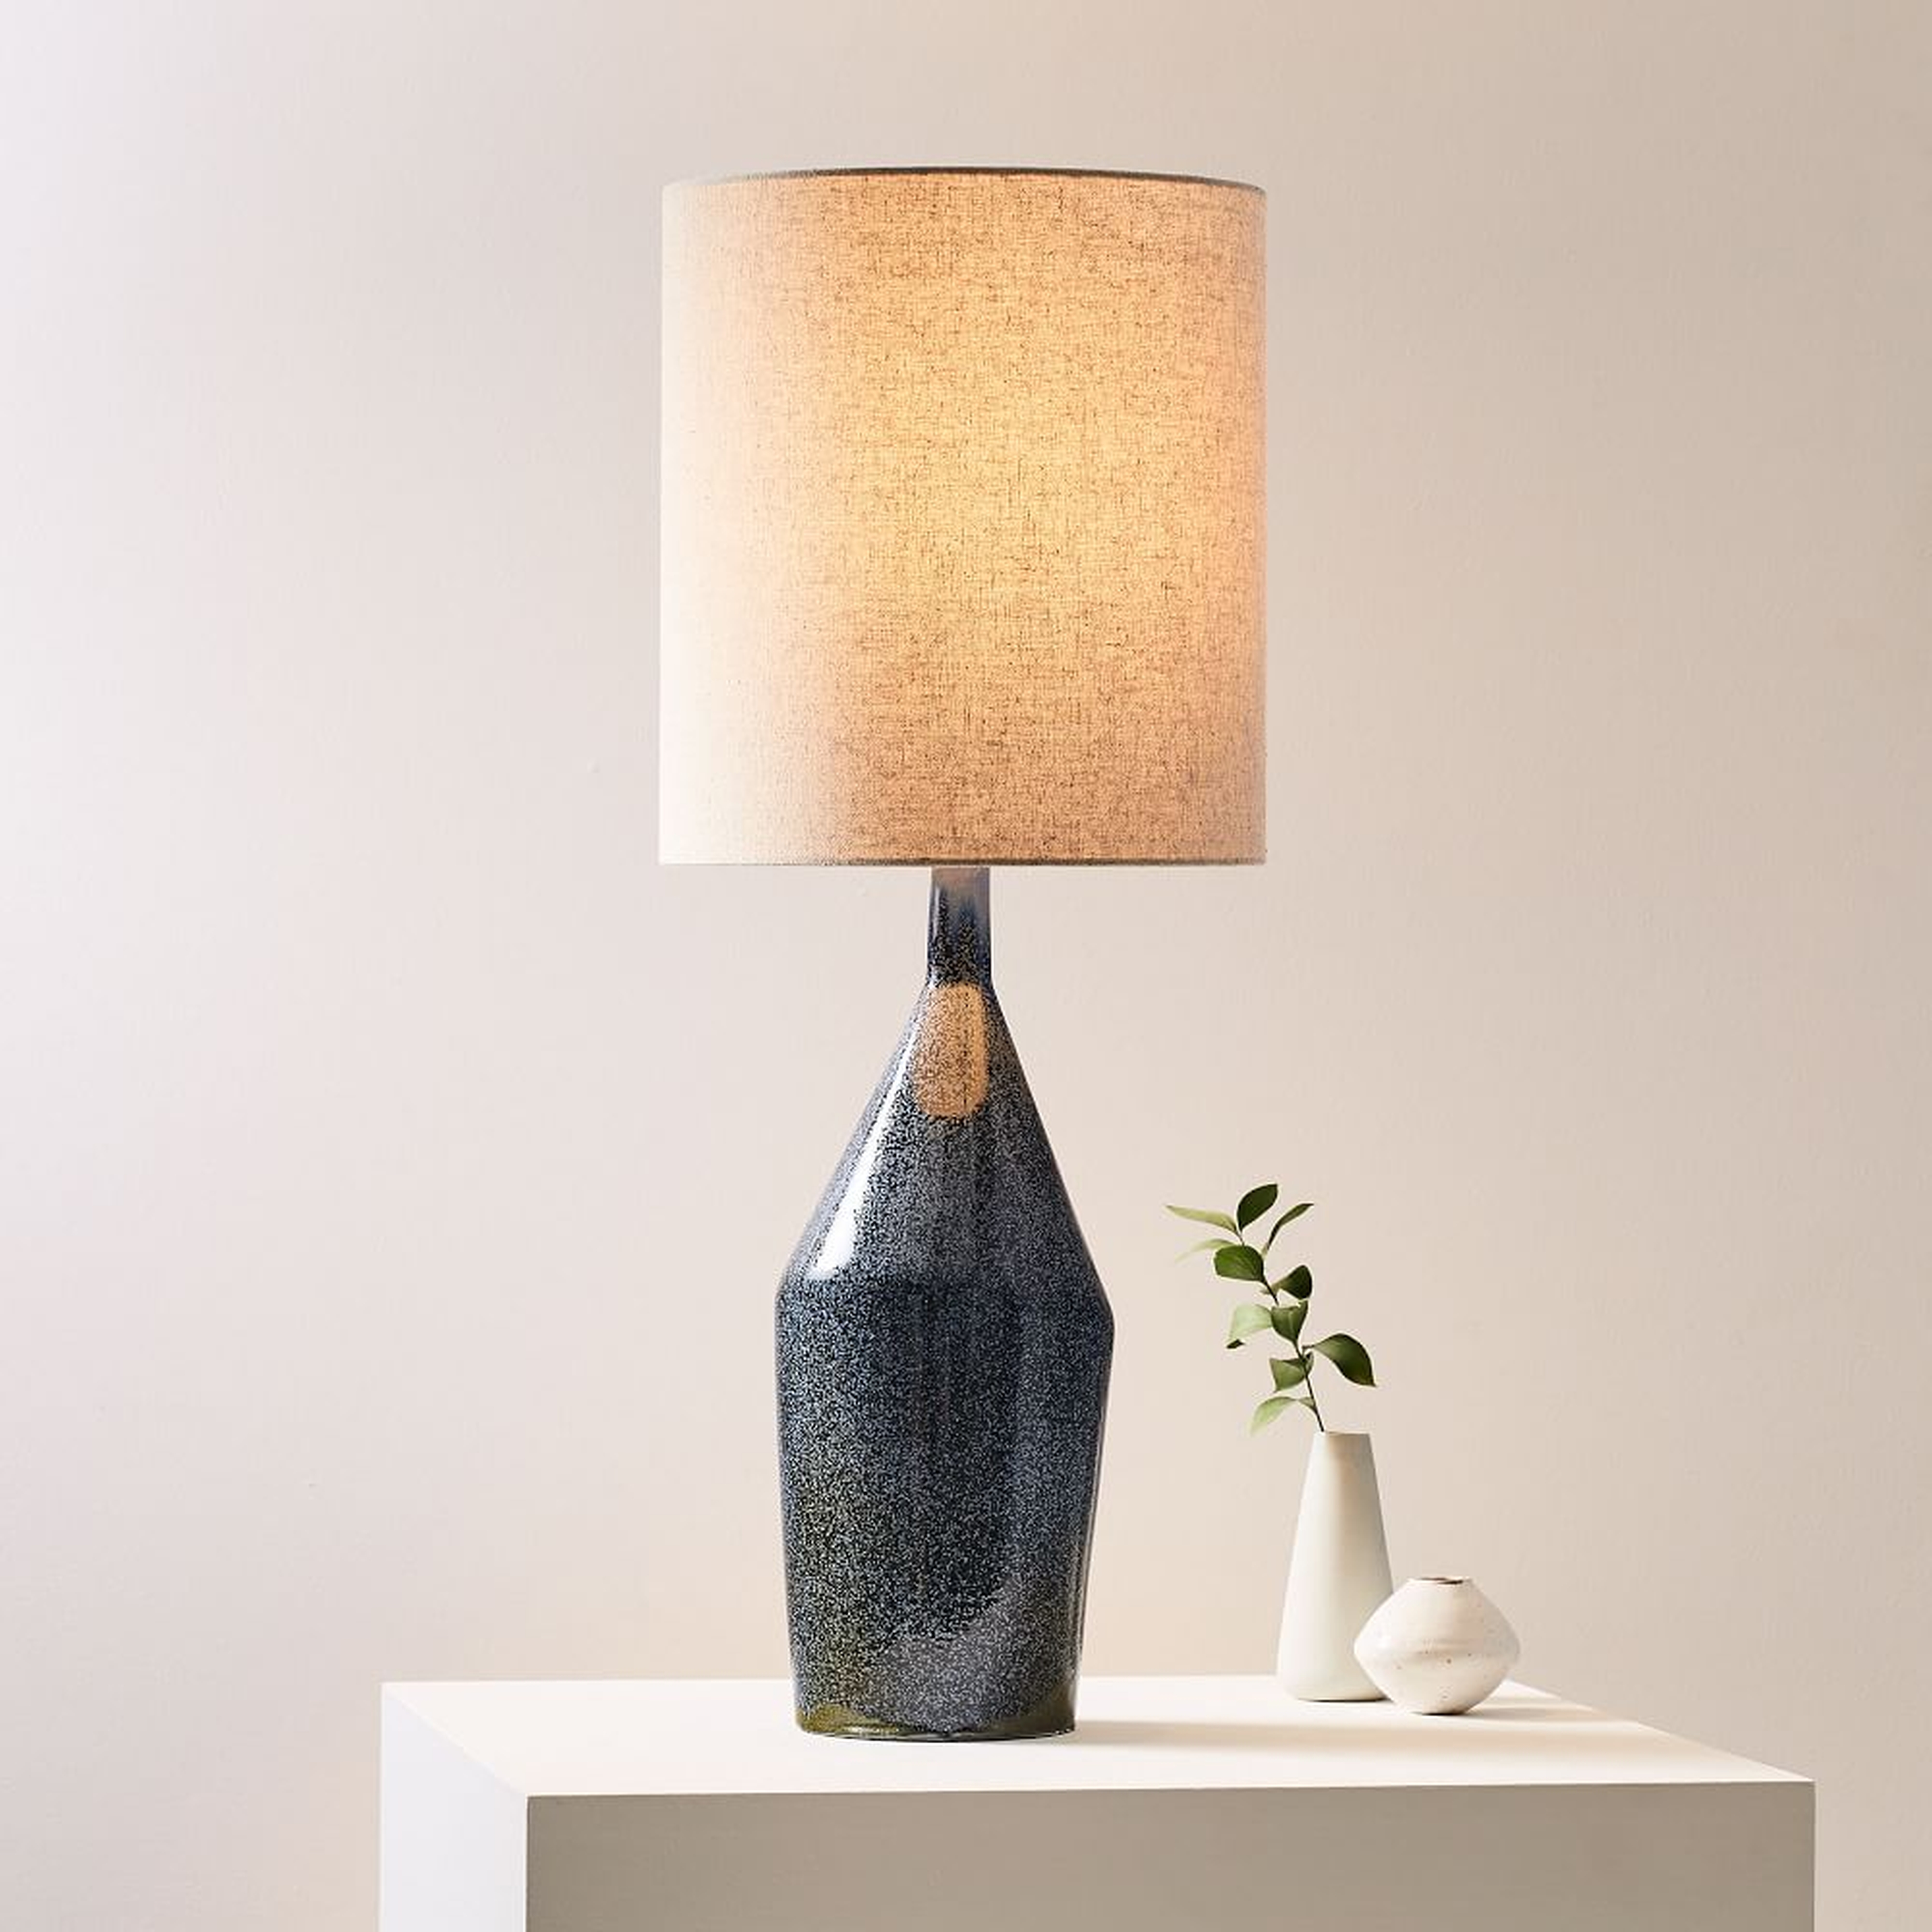 Asymmetry Ceramic Table Lamp, Large, Speckled Moss, Set of 2 - West Elm